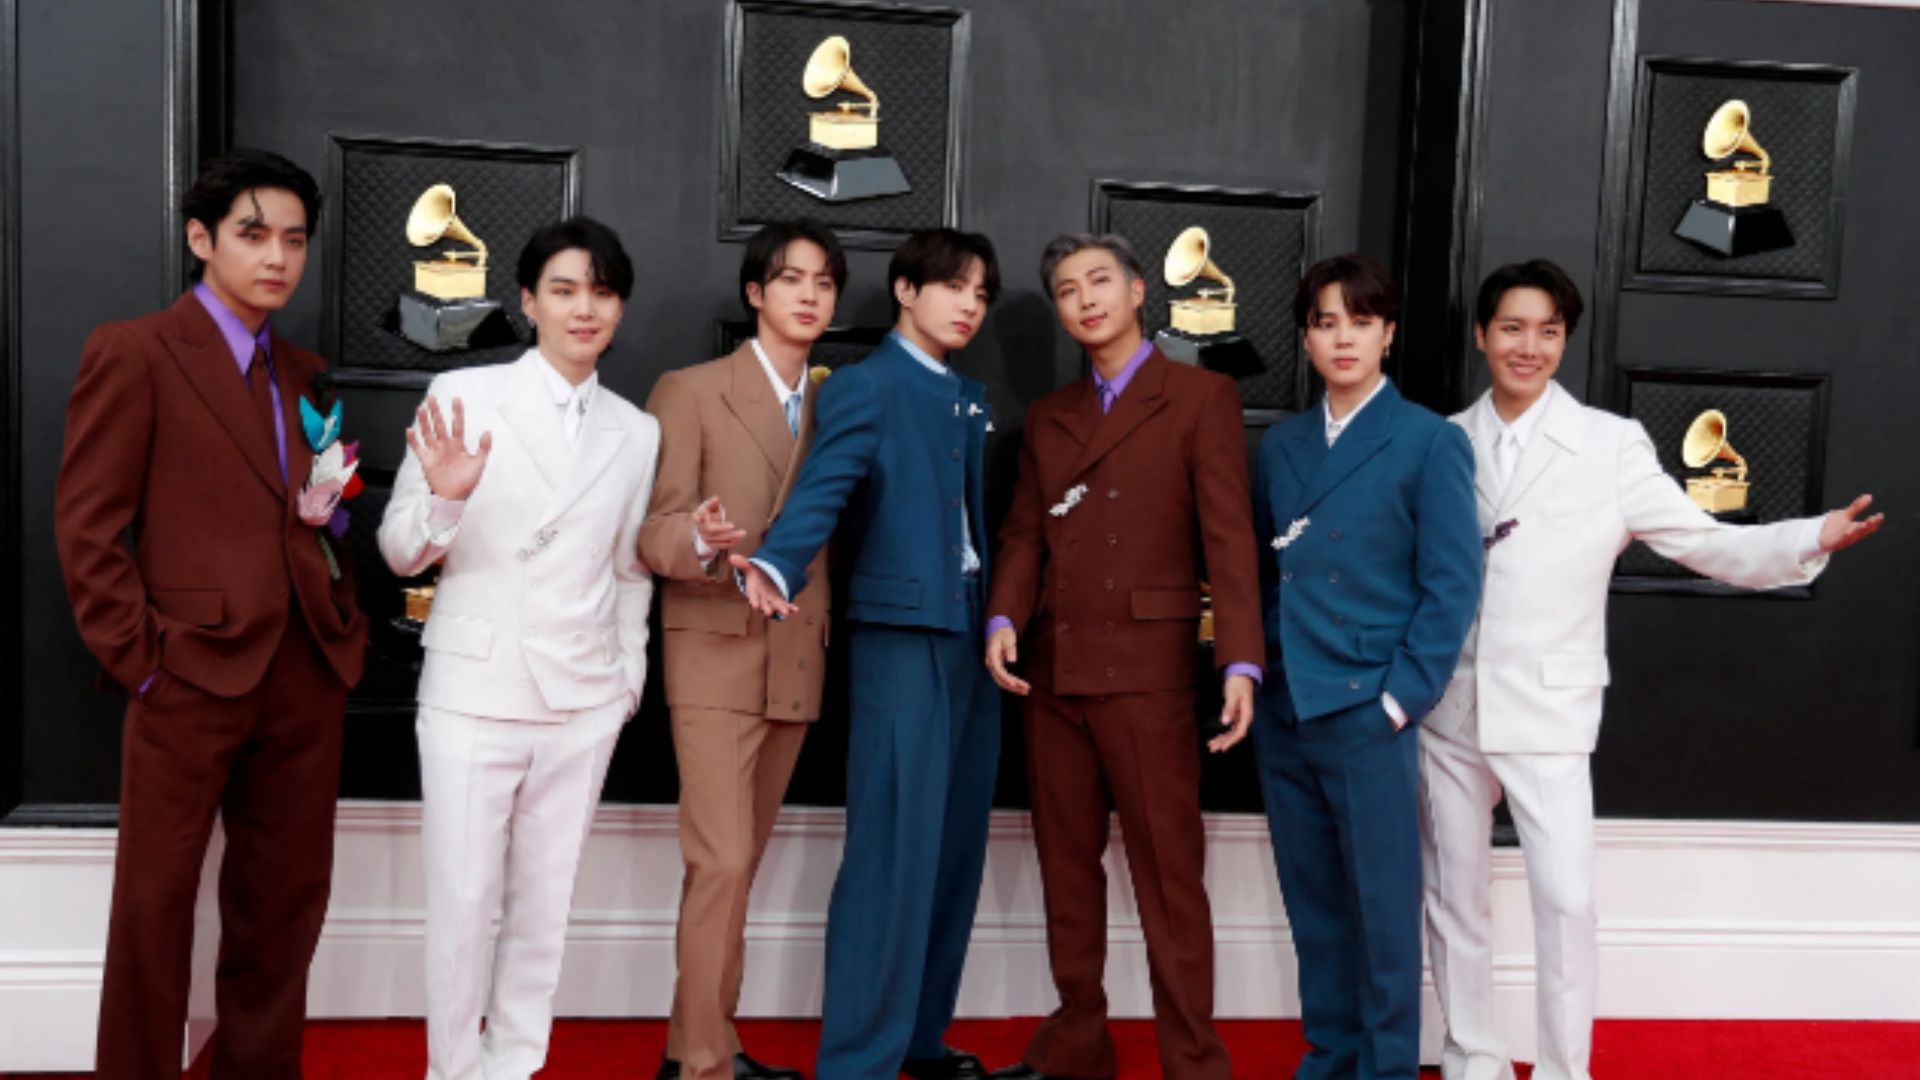 BTS' management ascend after clears vulnerability over military service